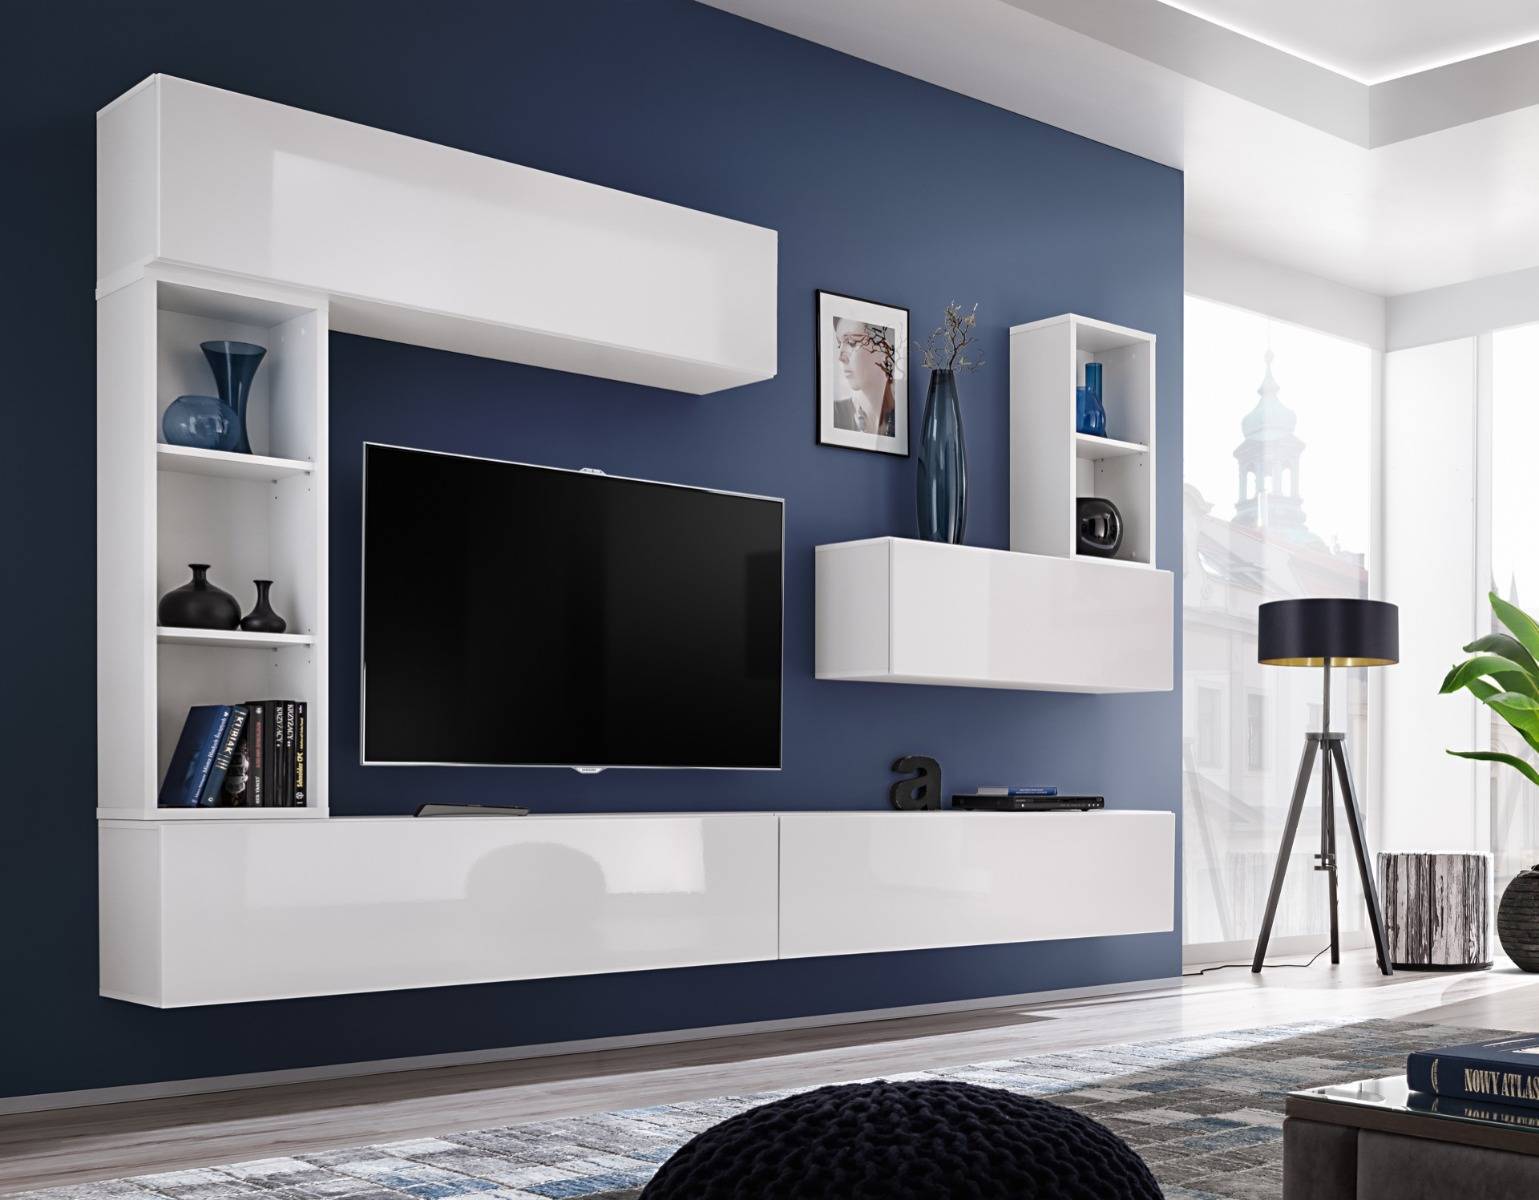 Astonishing Compilation of Full 4K TV Wall Unit Images: Over 999+ Pictures